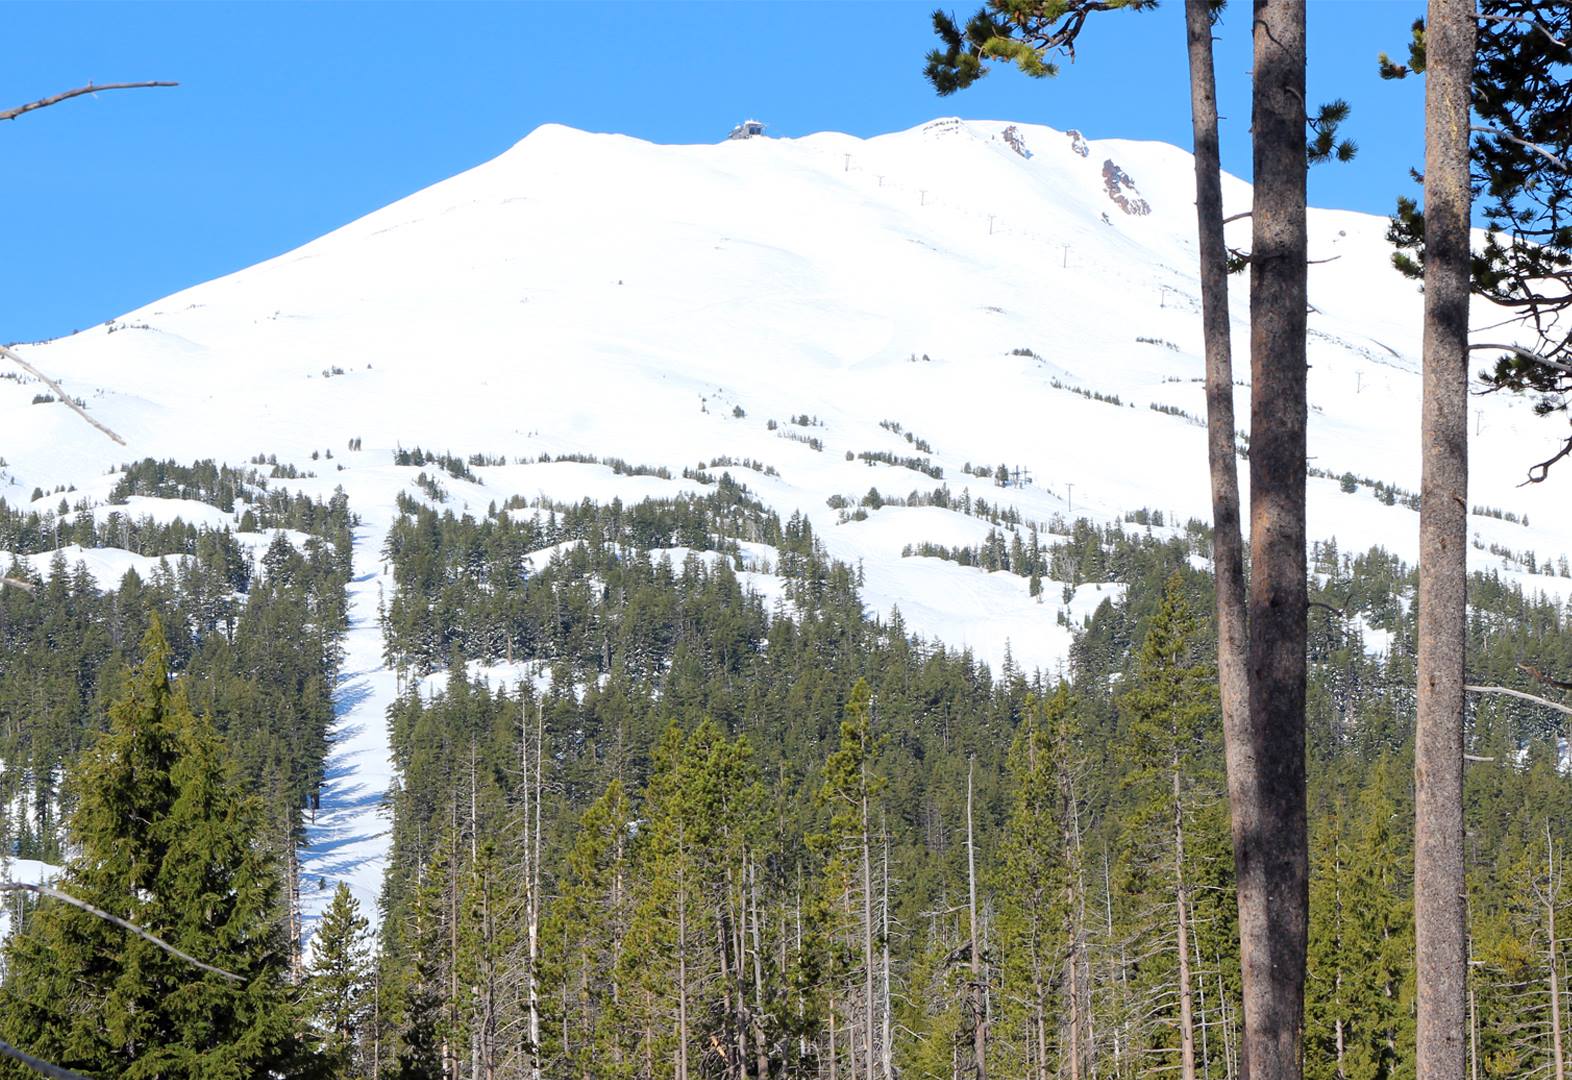 Mt. Bachelor, OR and the cut where the new Cloudchaser chairlift will be next year. photo: Bachelor, today